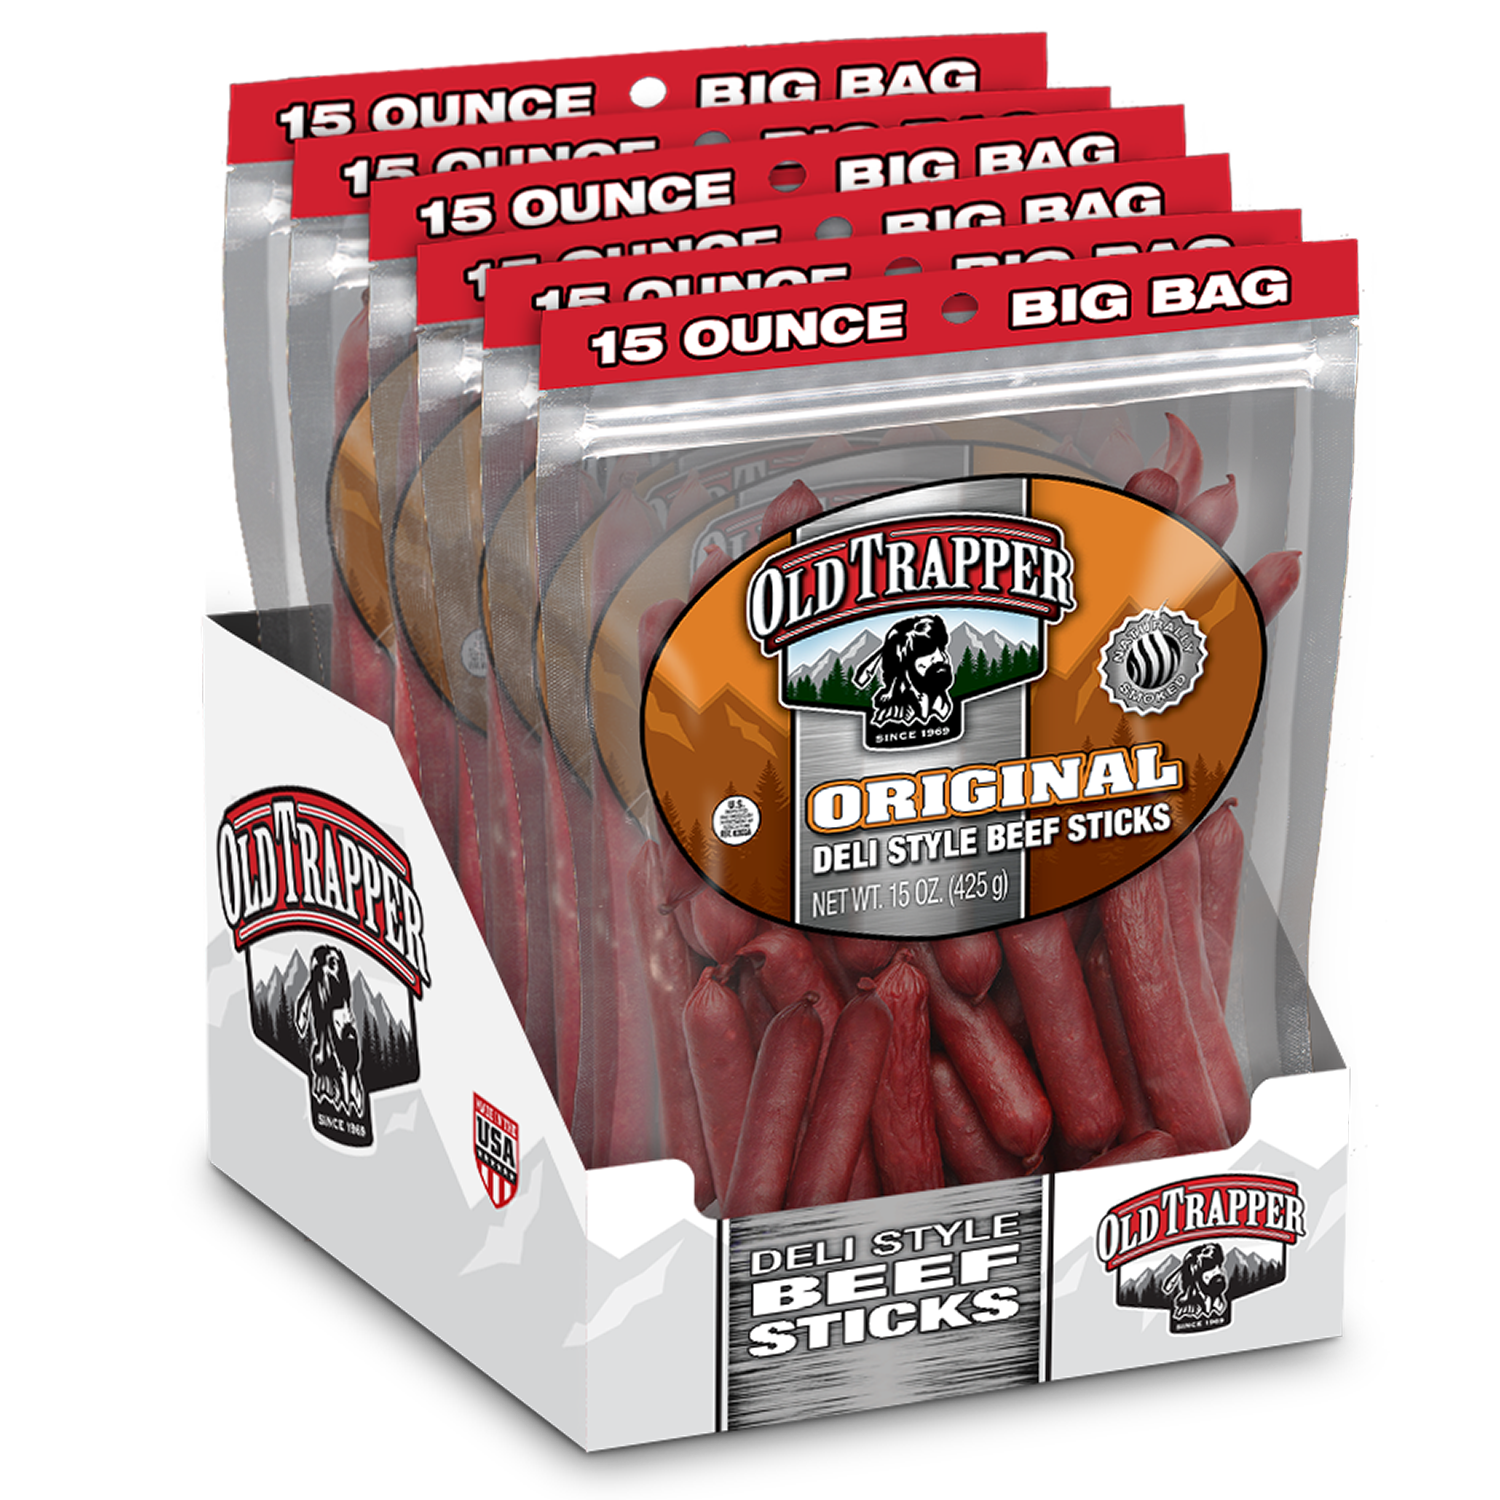 Case of 6 Packages -  Original Deli Style Beef Sticks